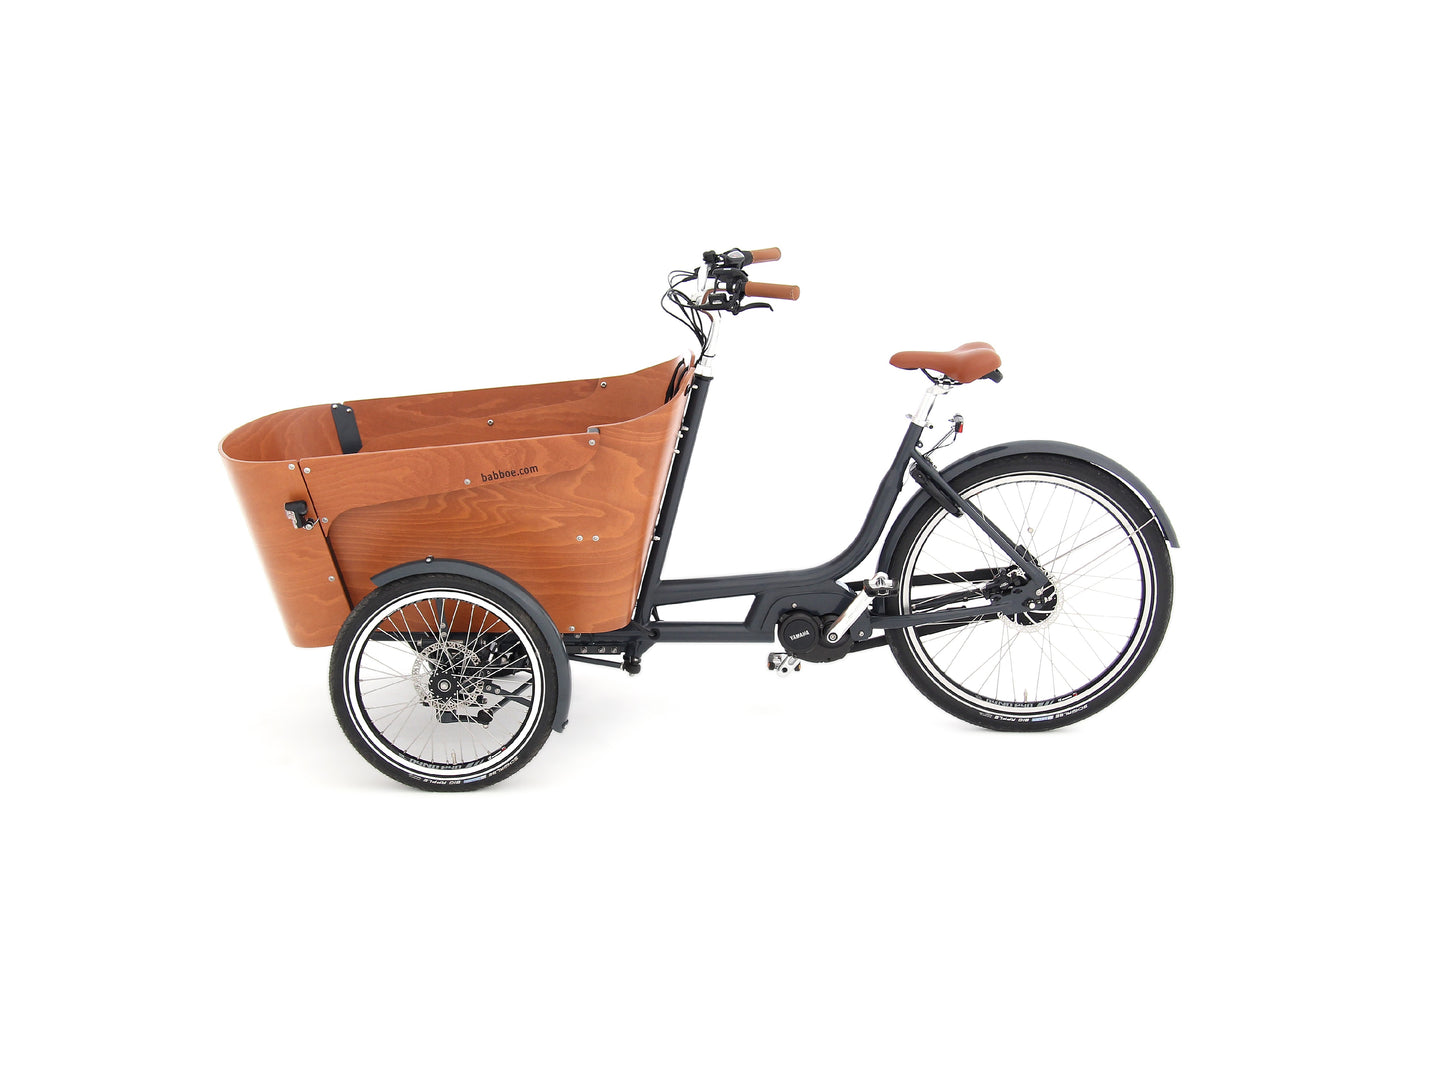 BABBOE FLOW MOUNTAIN 500Wh